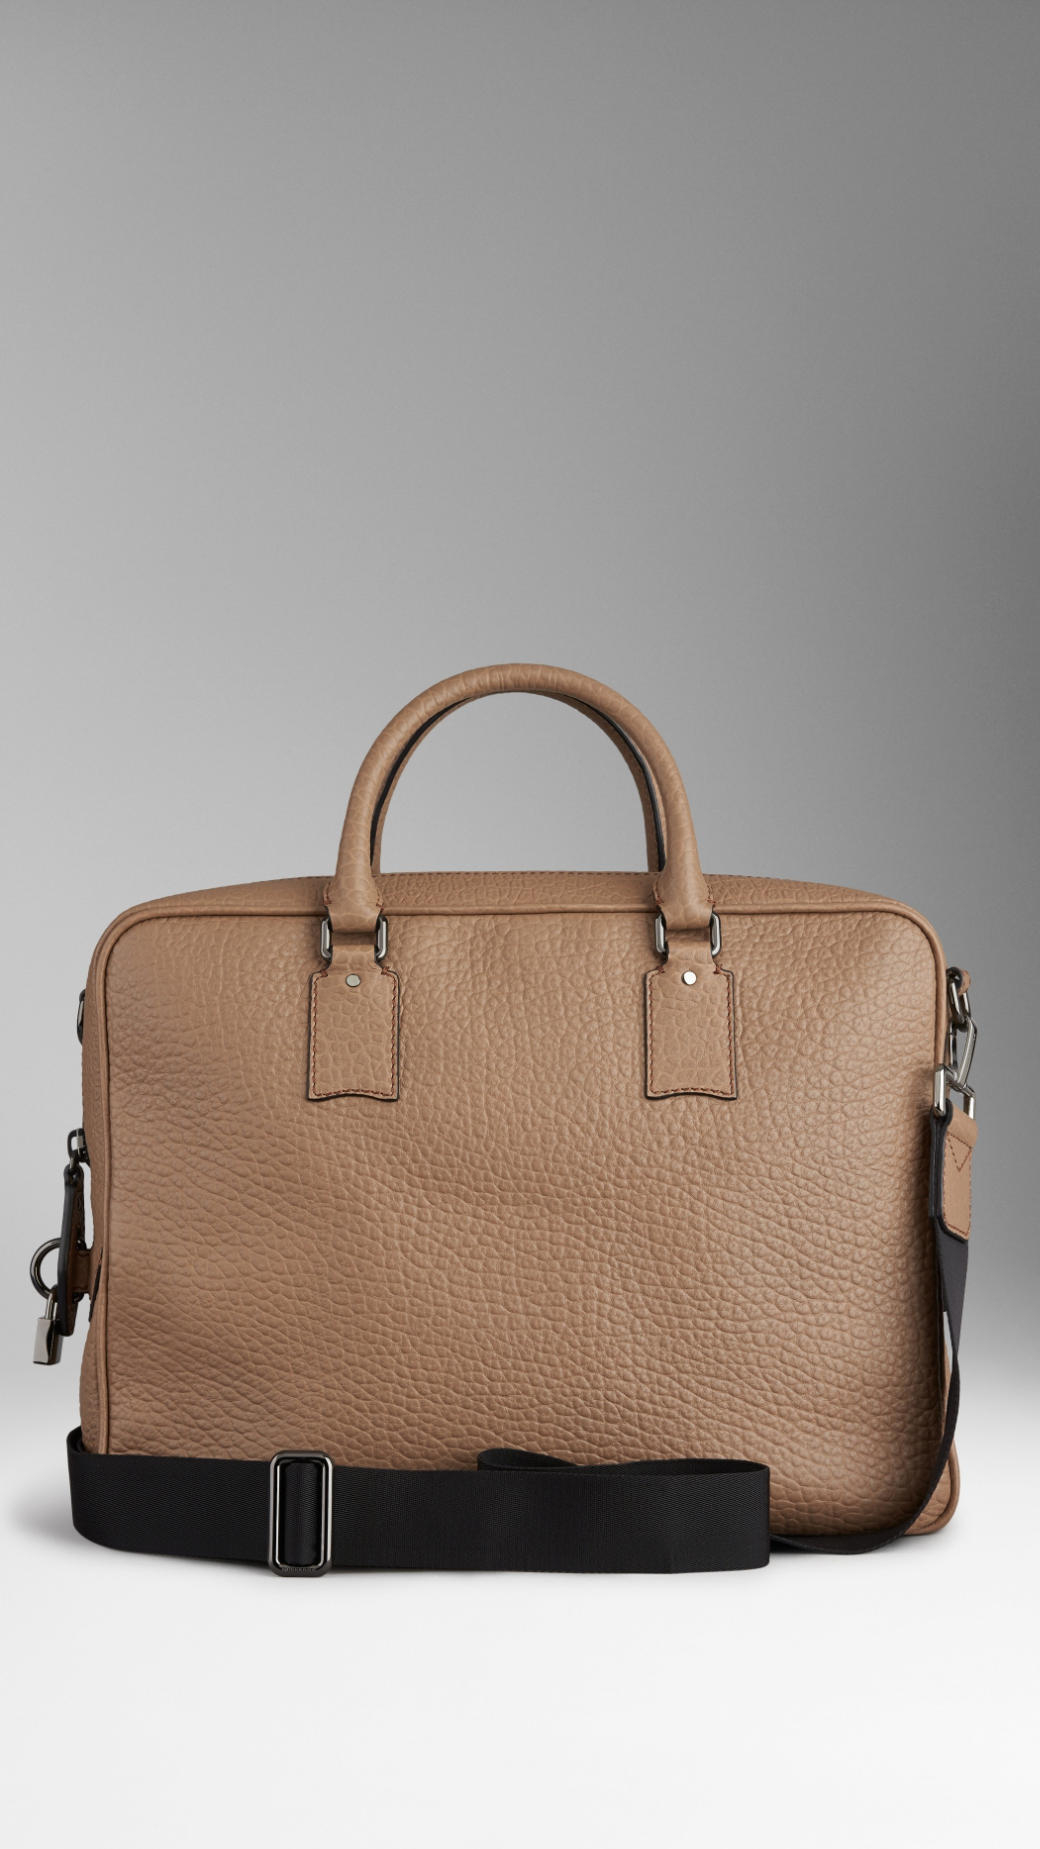 Lyst - Burberry Signature Grain Leather Briefcase in Brown for Men